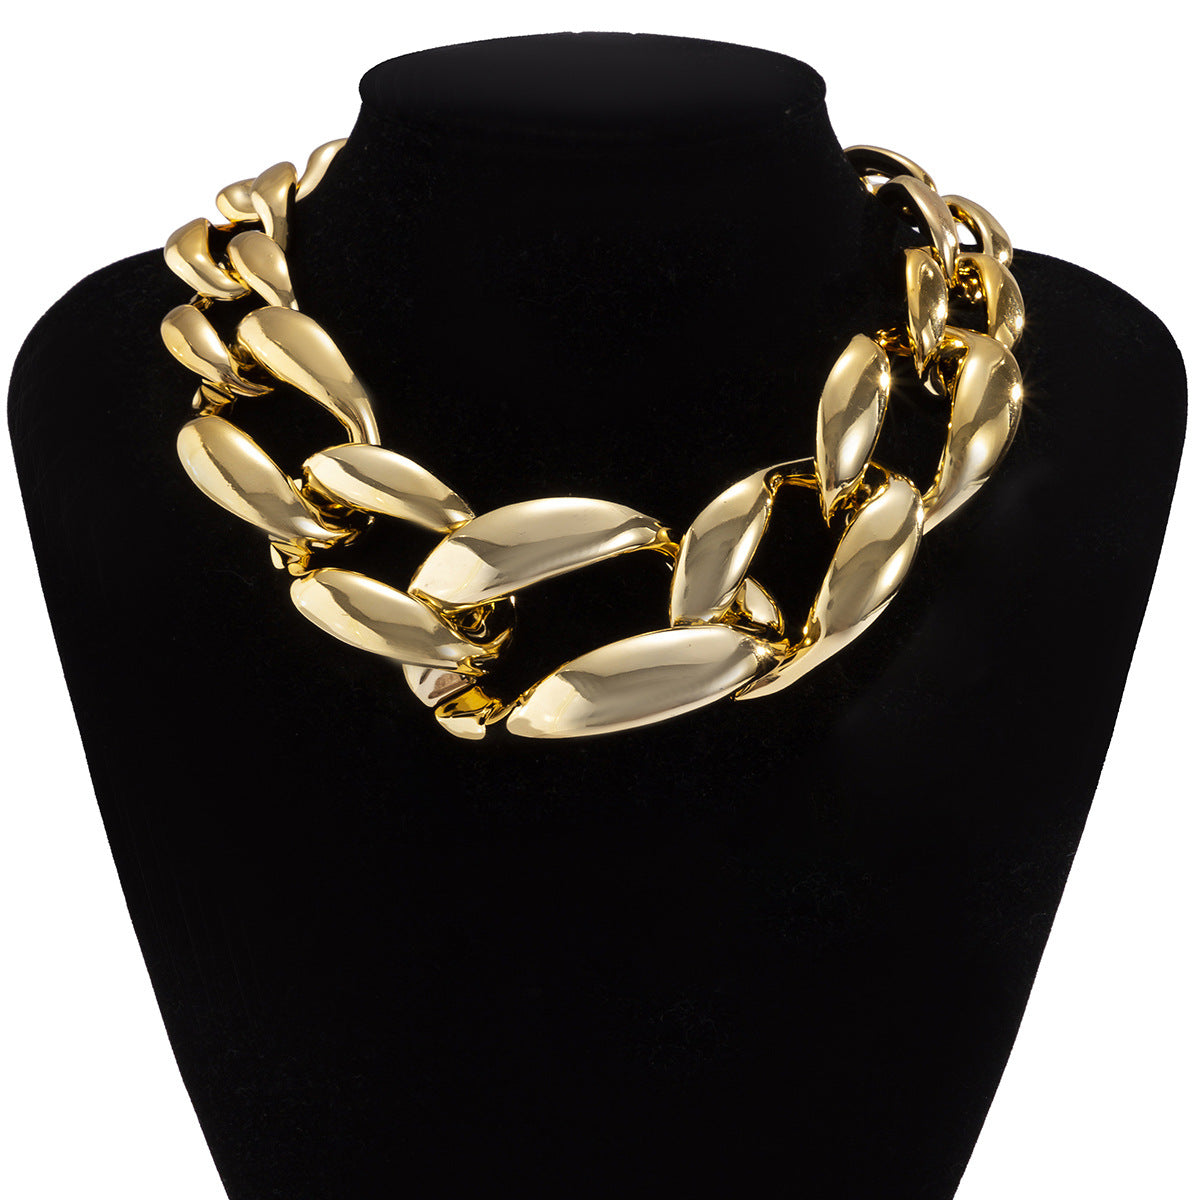 Extravagant Single-Layer Necklace with Bold Chain and Geometric Design for Women